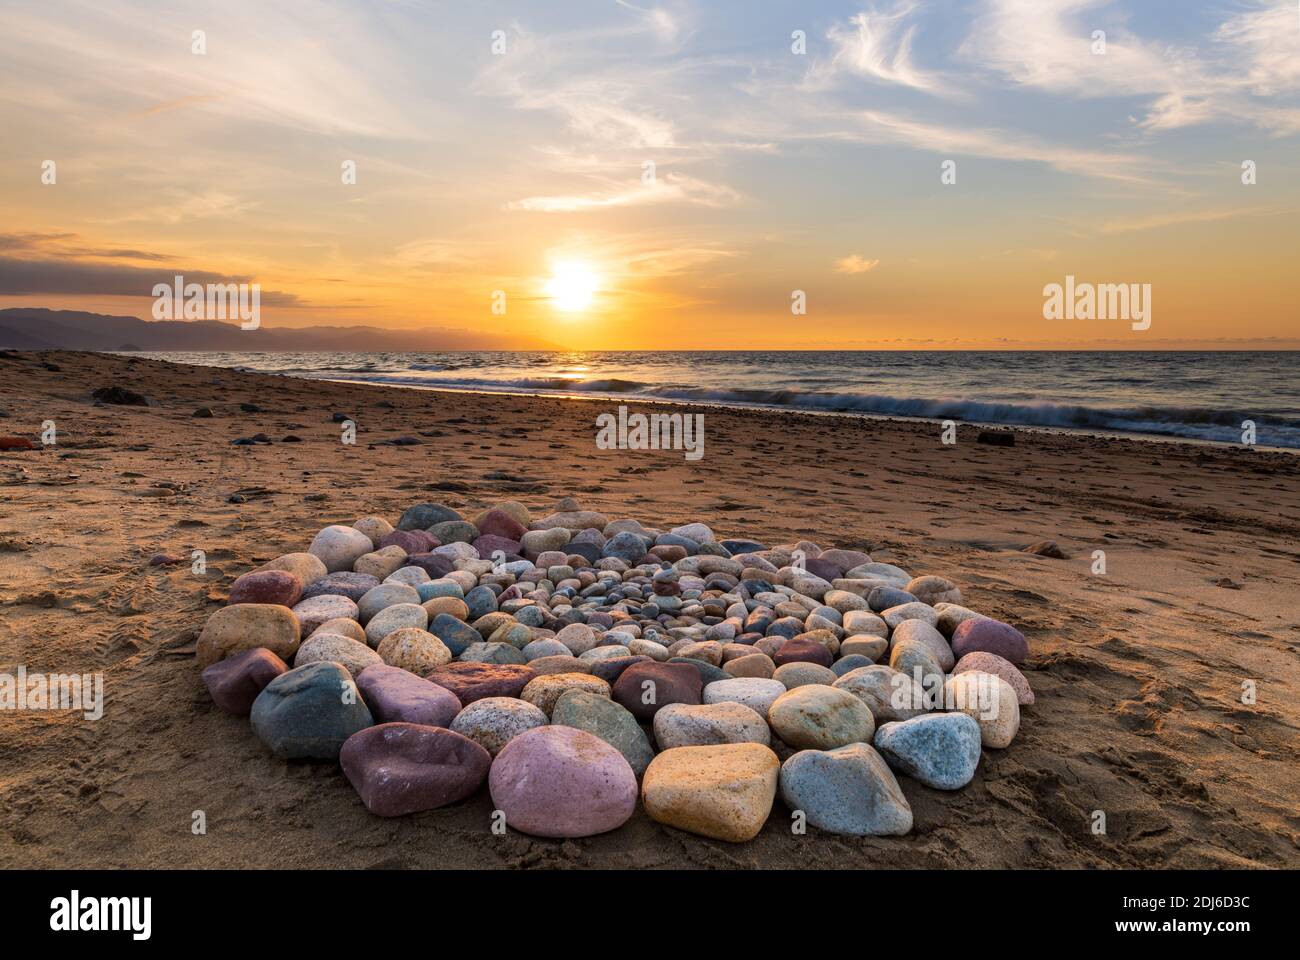 A Group of Stones Are Arranged on the Beach in a Ceremonial Ritualistic Pattern Stock Photo